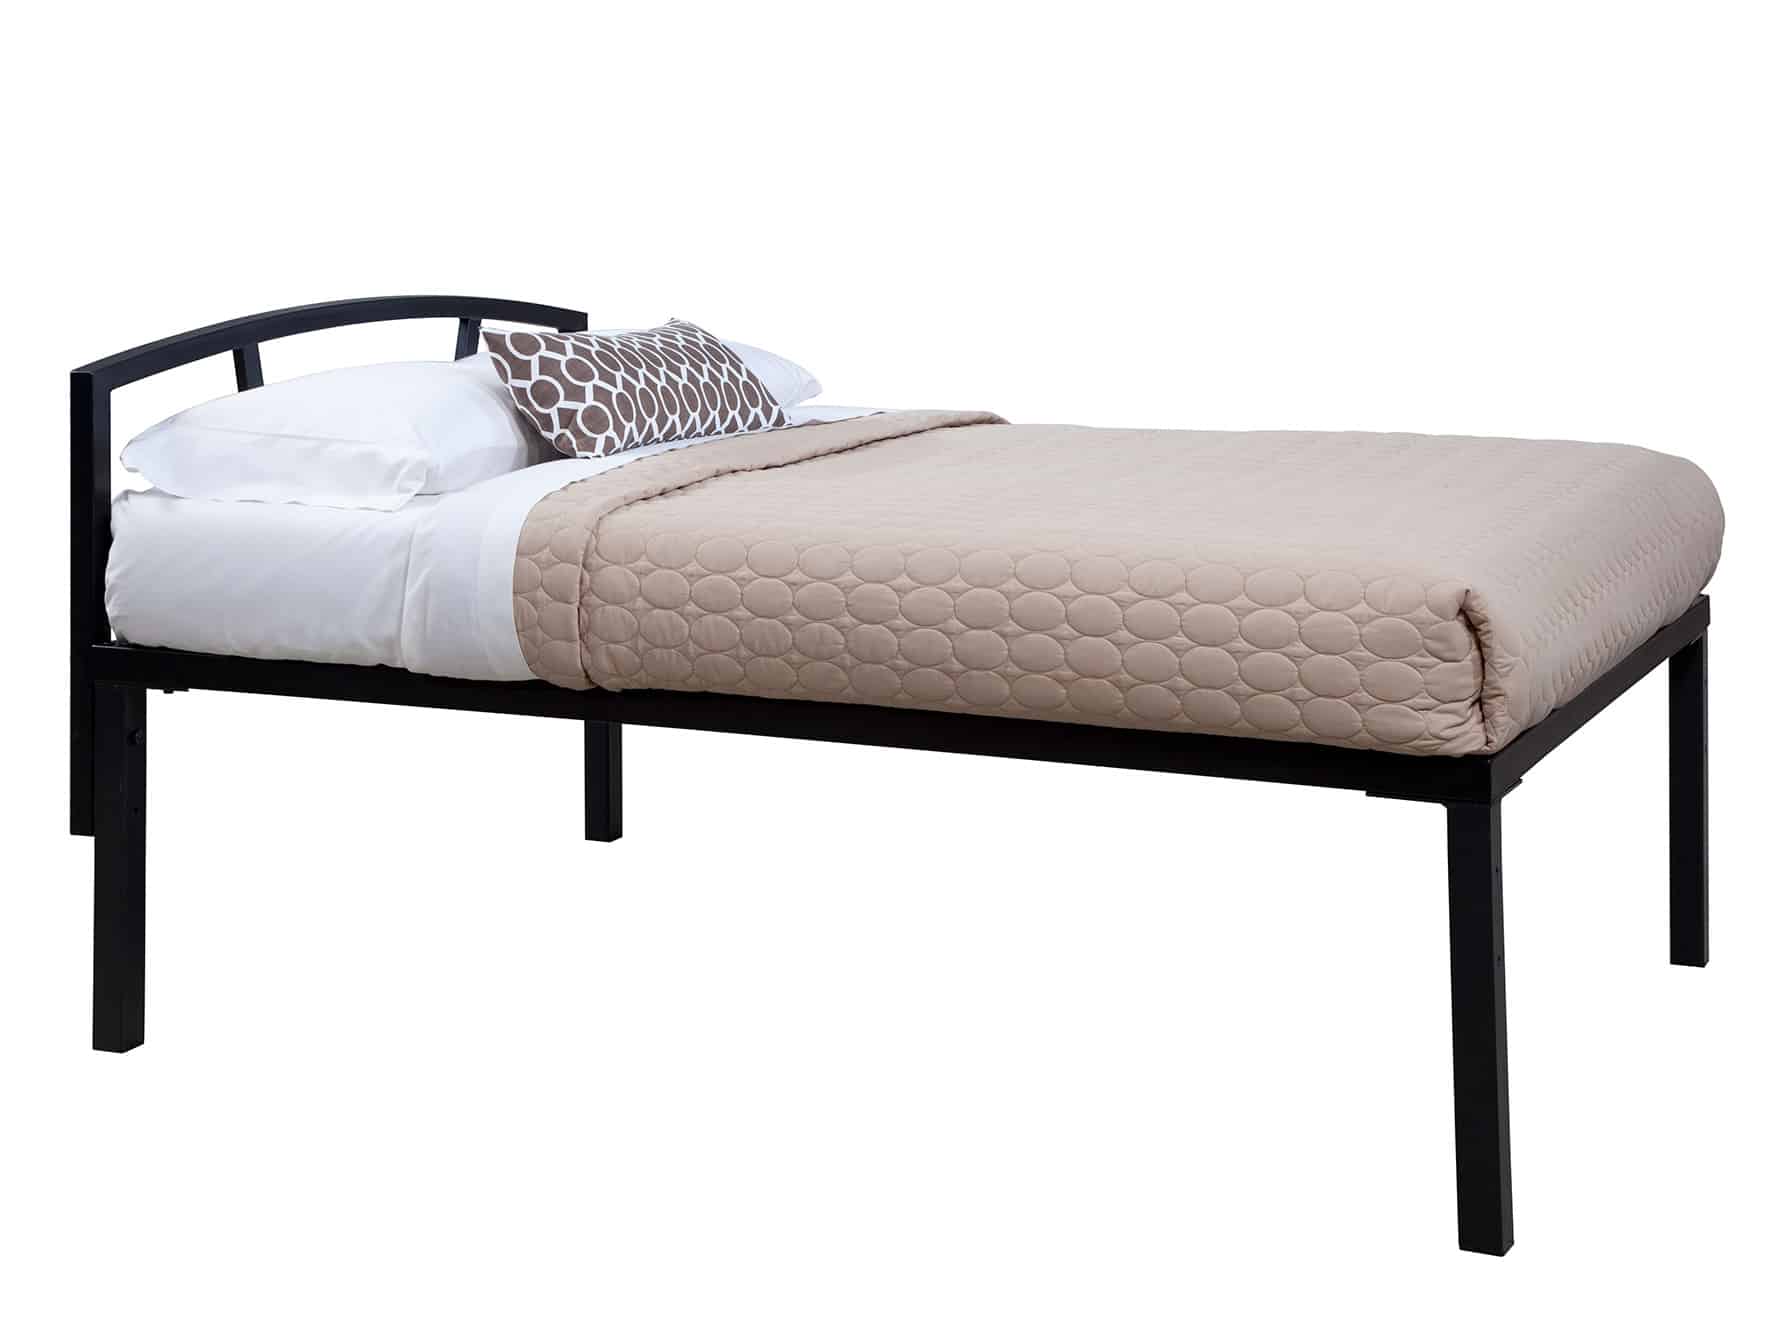 Double Raised Bed with Metal Headboard for Student Rooms on College Campus